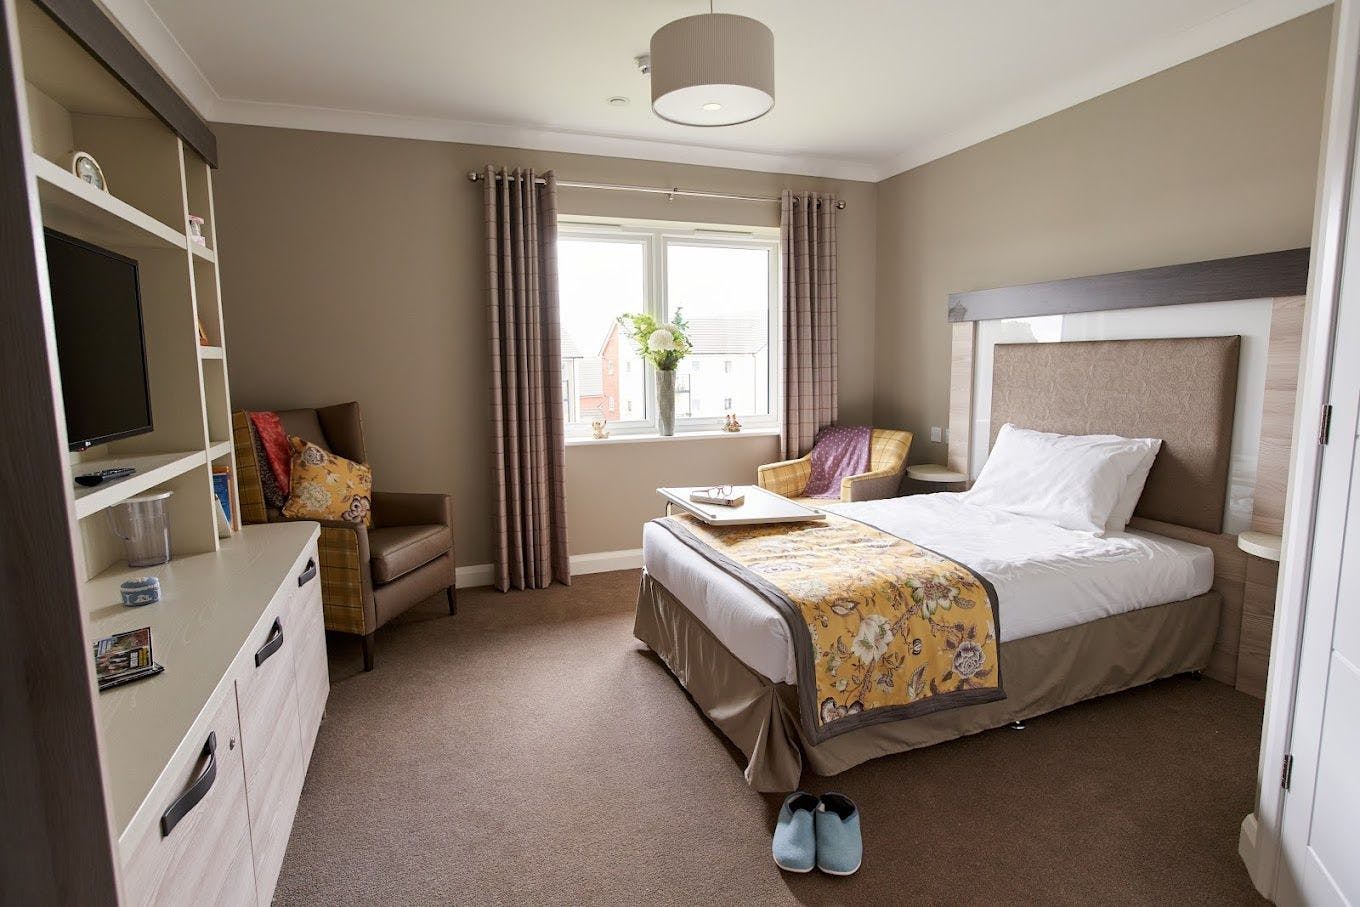 Bedroom of Nodens Manor care home in Lydney, Gloucestershire